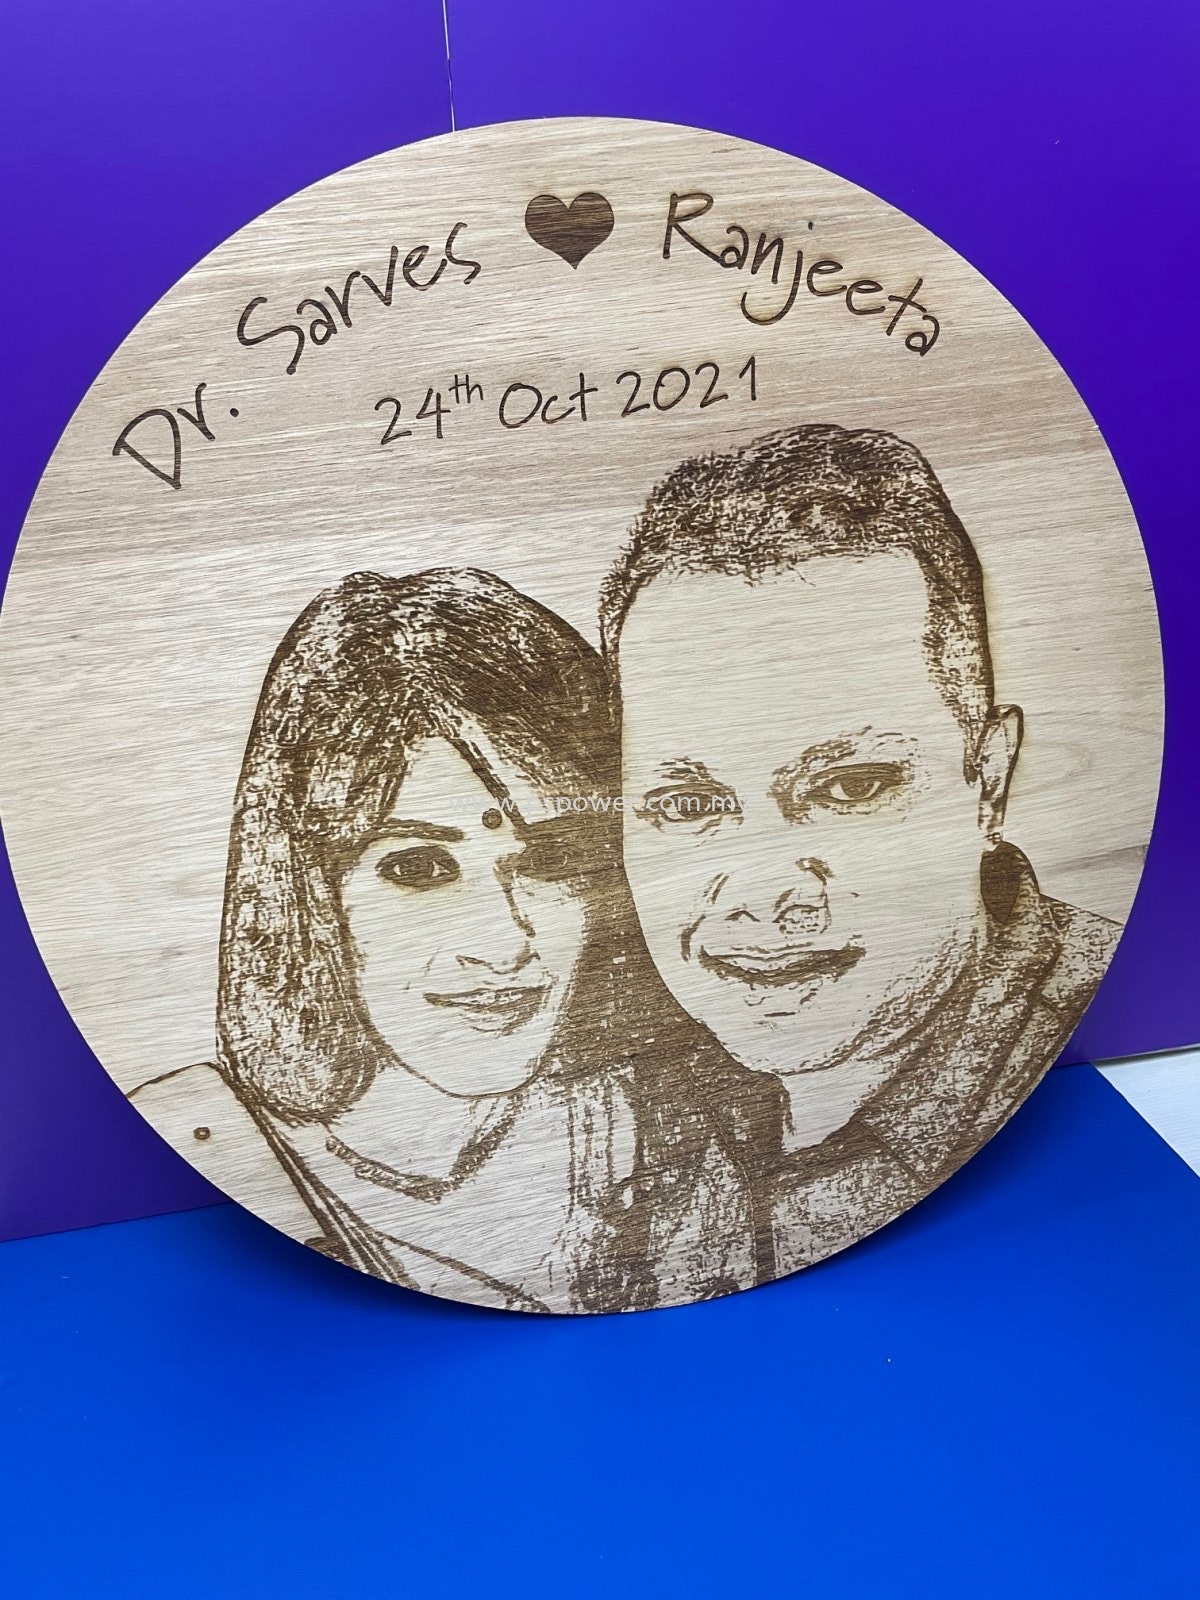 Laser Engrave Photo on Wood for Wedding